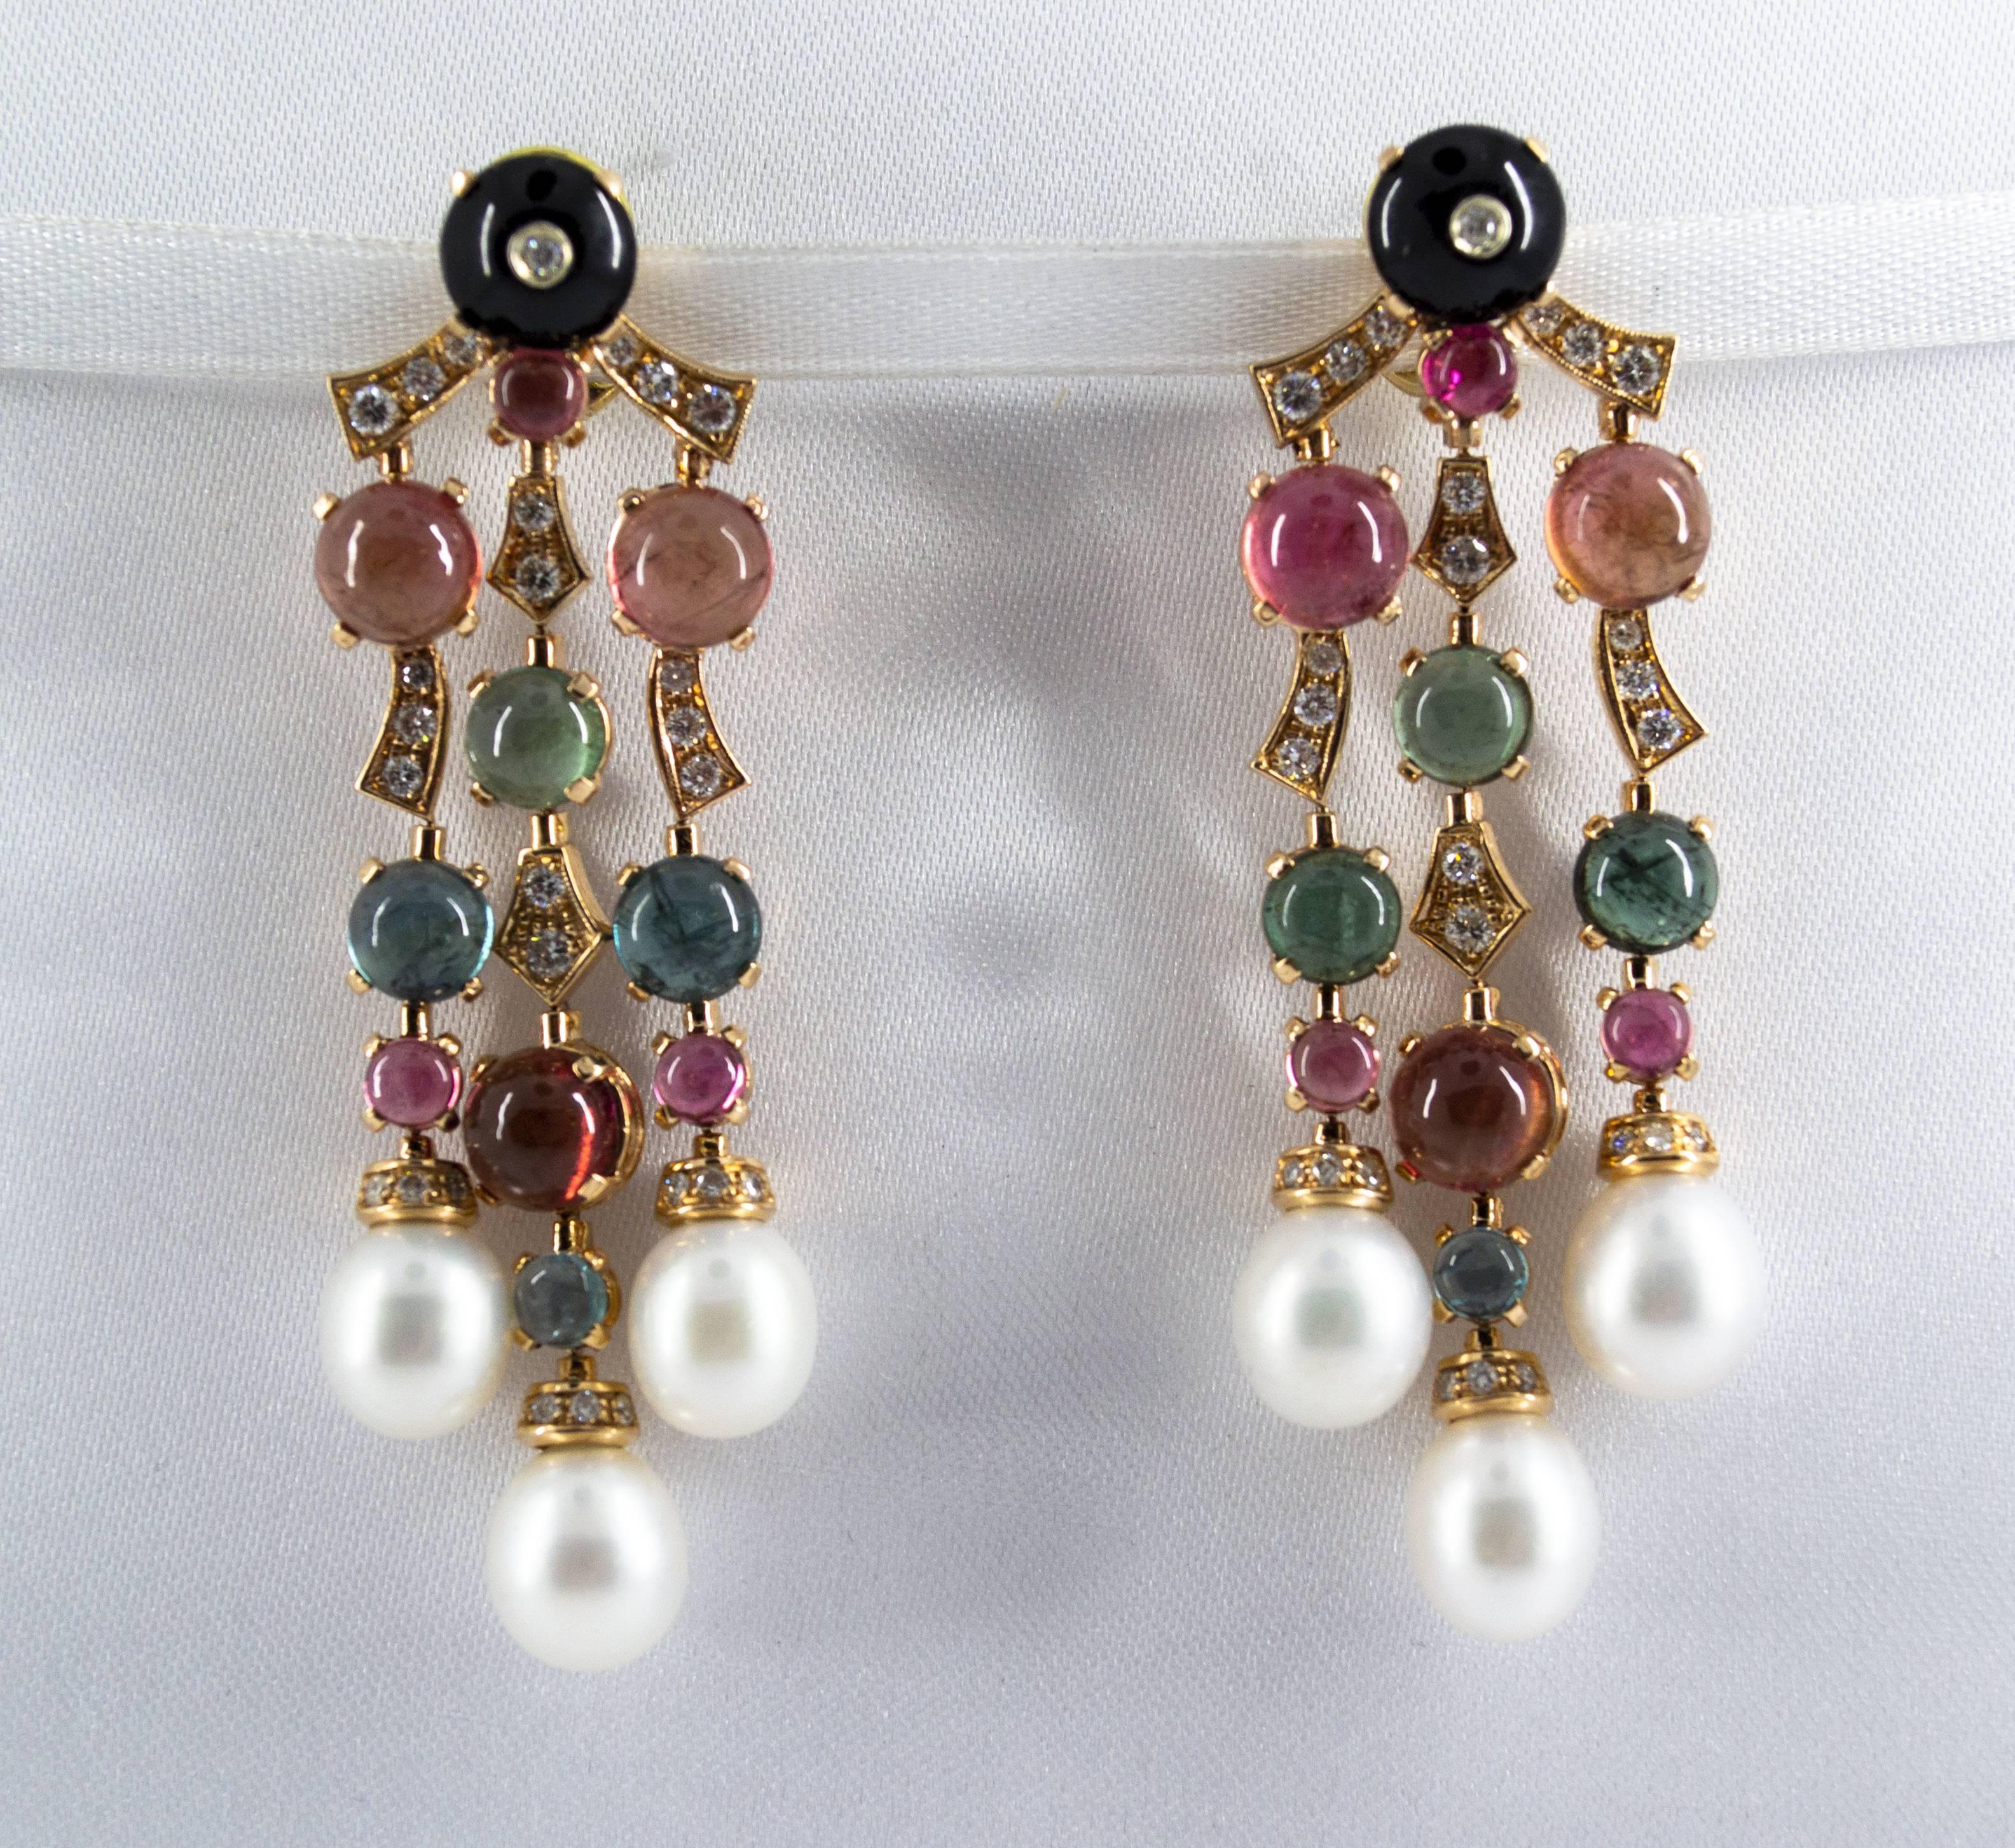 These Clip-On Earrings are made of 14K Yellow Gold.
These Earrings have 1.05 Carats of White Diamonds.
These Earrings have 21.80 Carats of Tourmalines.
These Earrings have also Pearls and Onyxes.
All our Earrings have pins for pierced ears but we